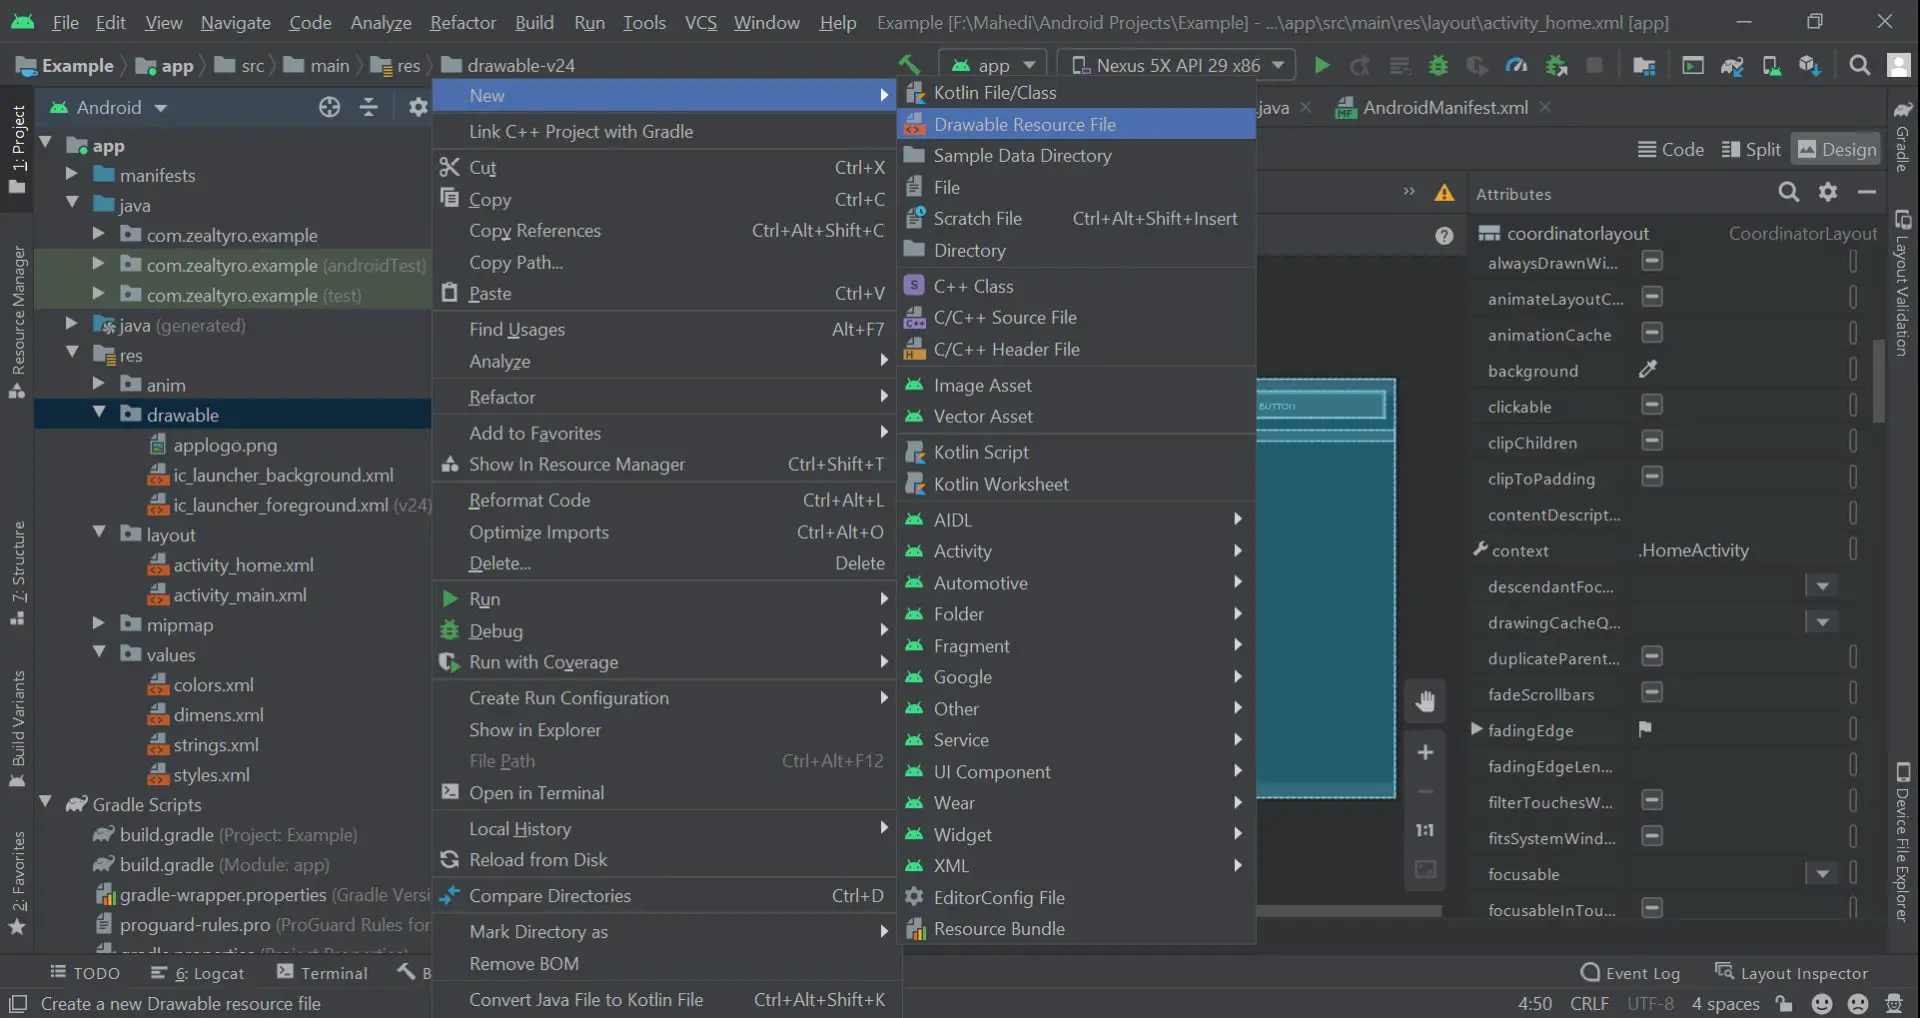 How To Add Ripple Effect/Animation To Button or Any Views in Android Studio